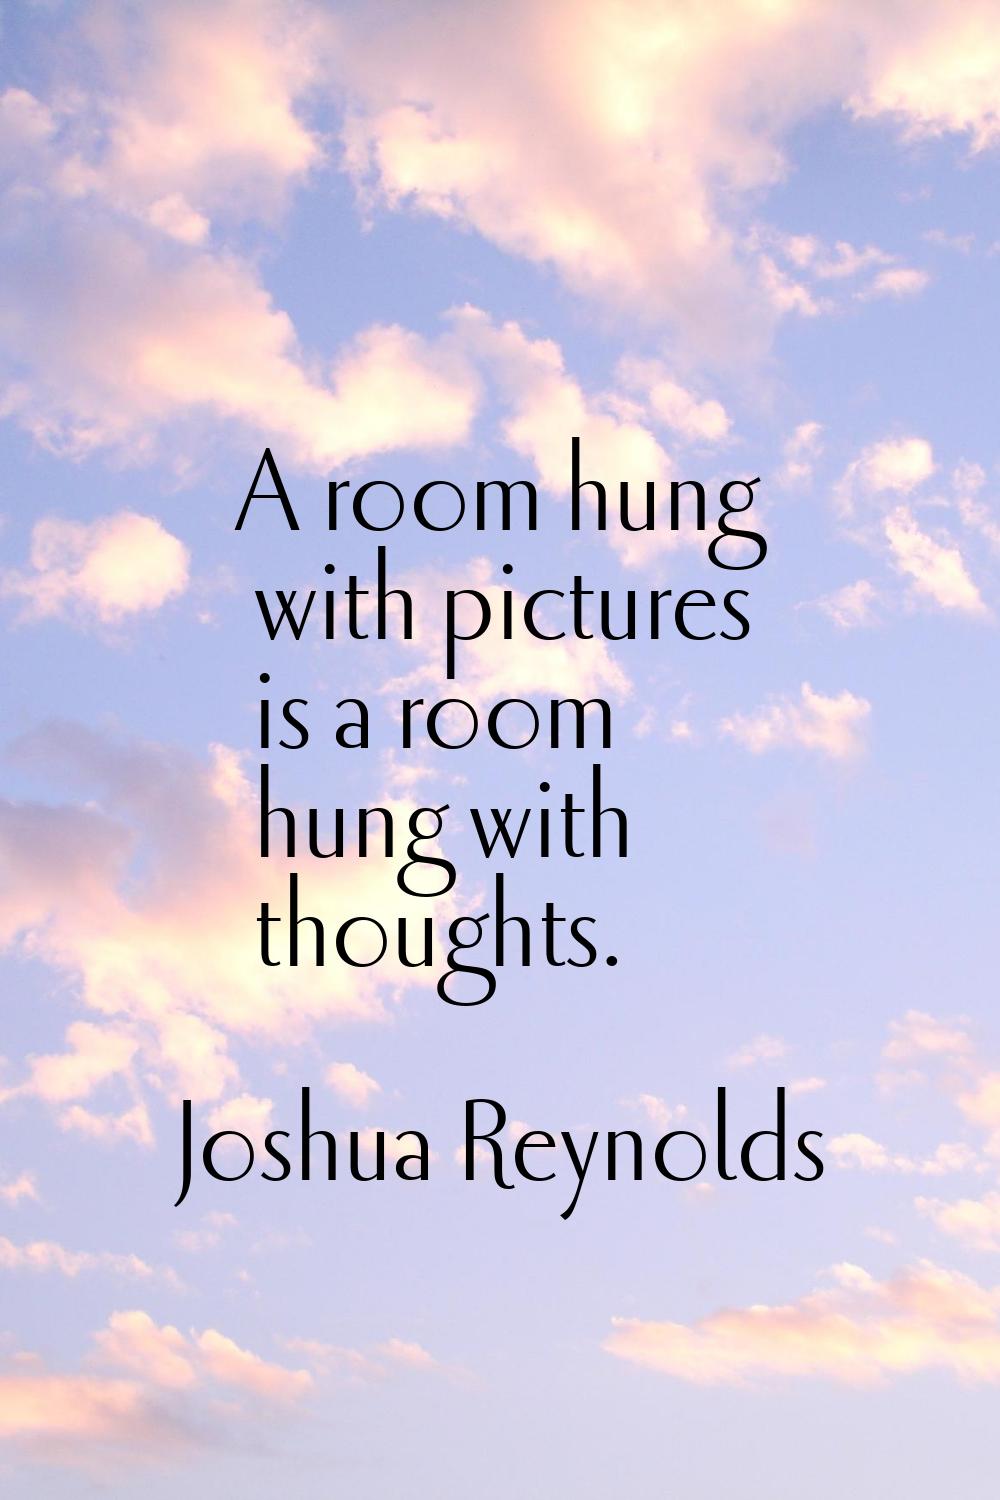 A room hung with pictures is a room hung with thoughts.